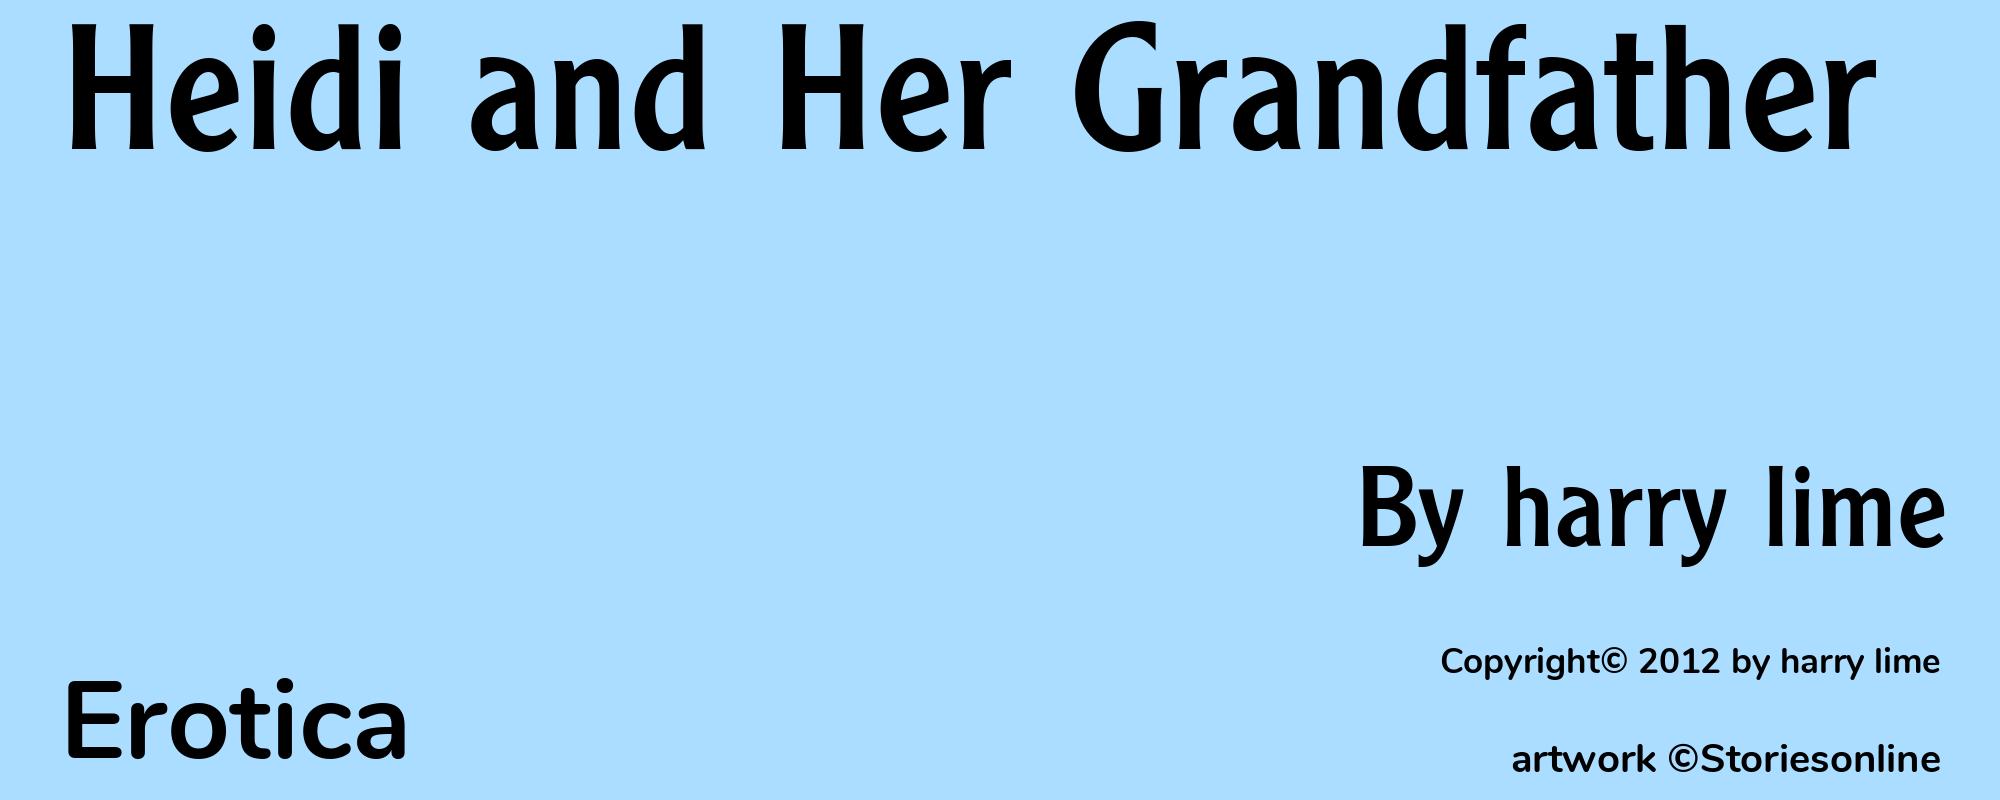 Heidi and Her Grandfather - Cover